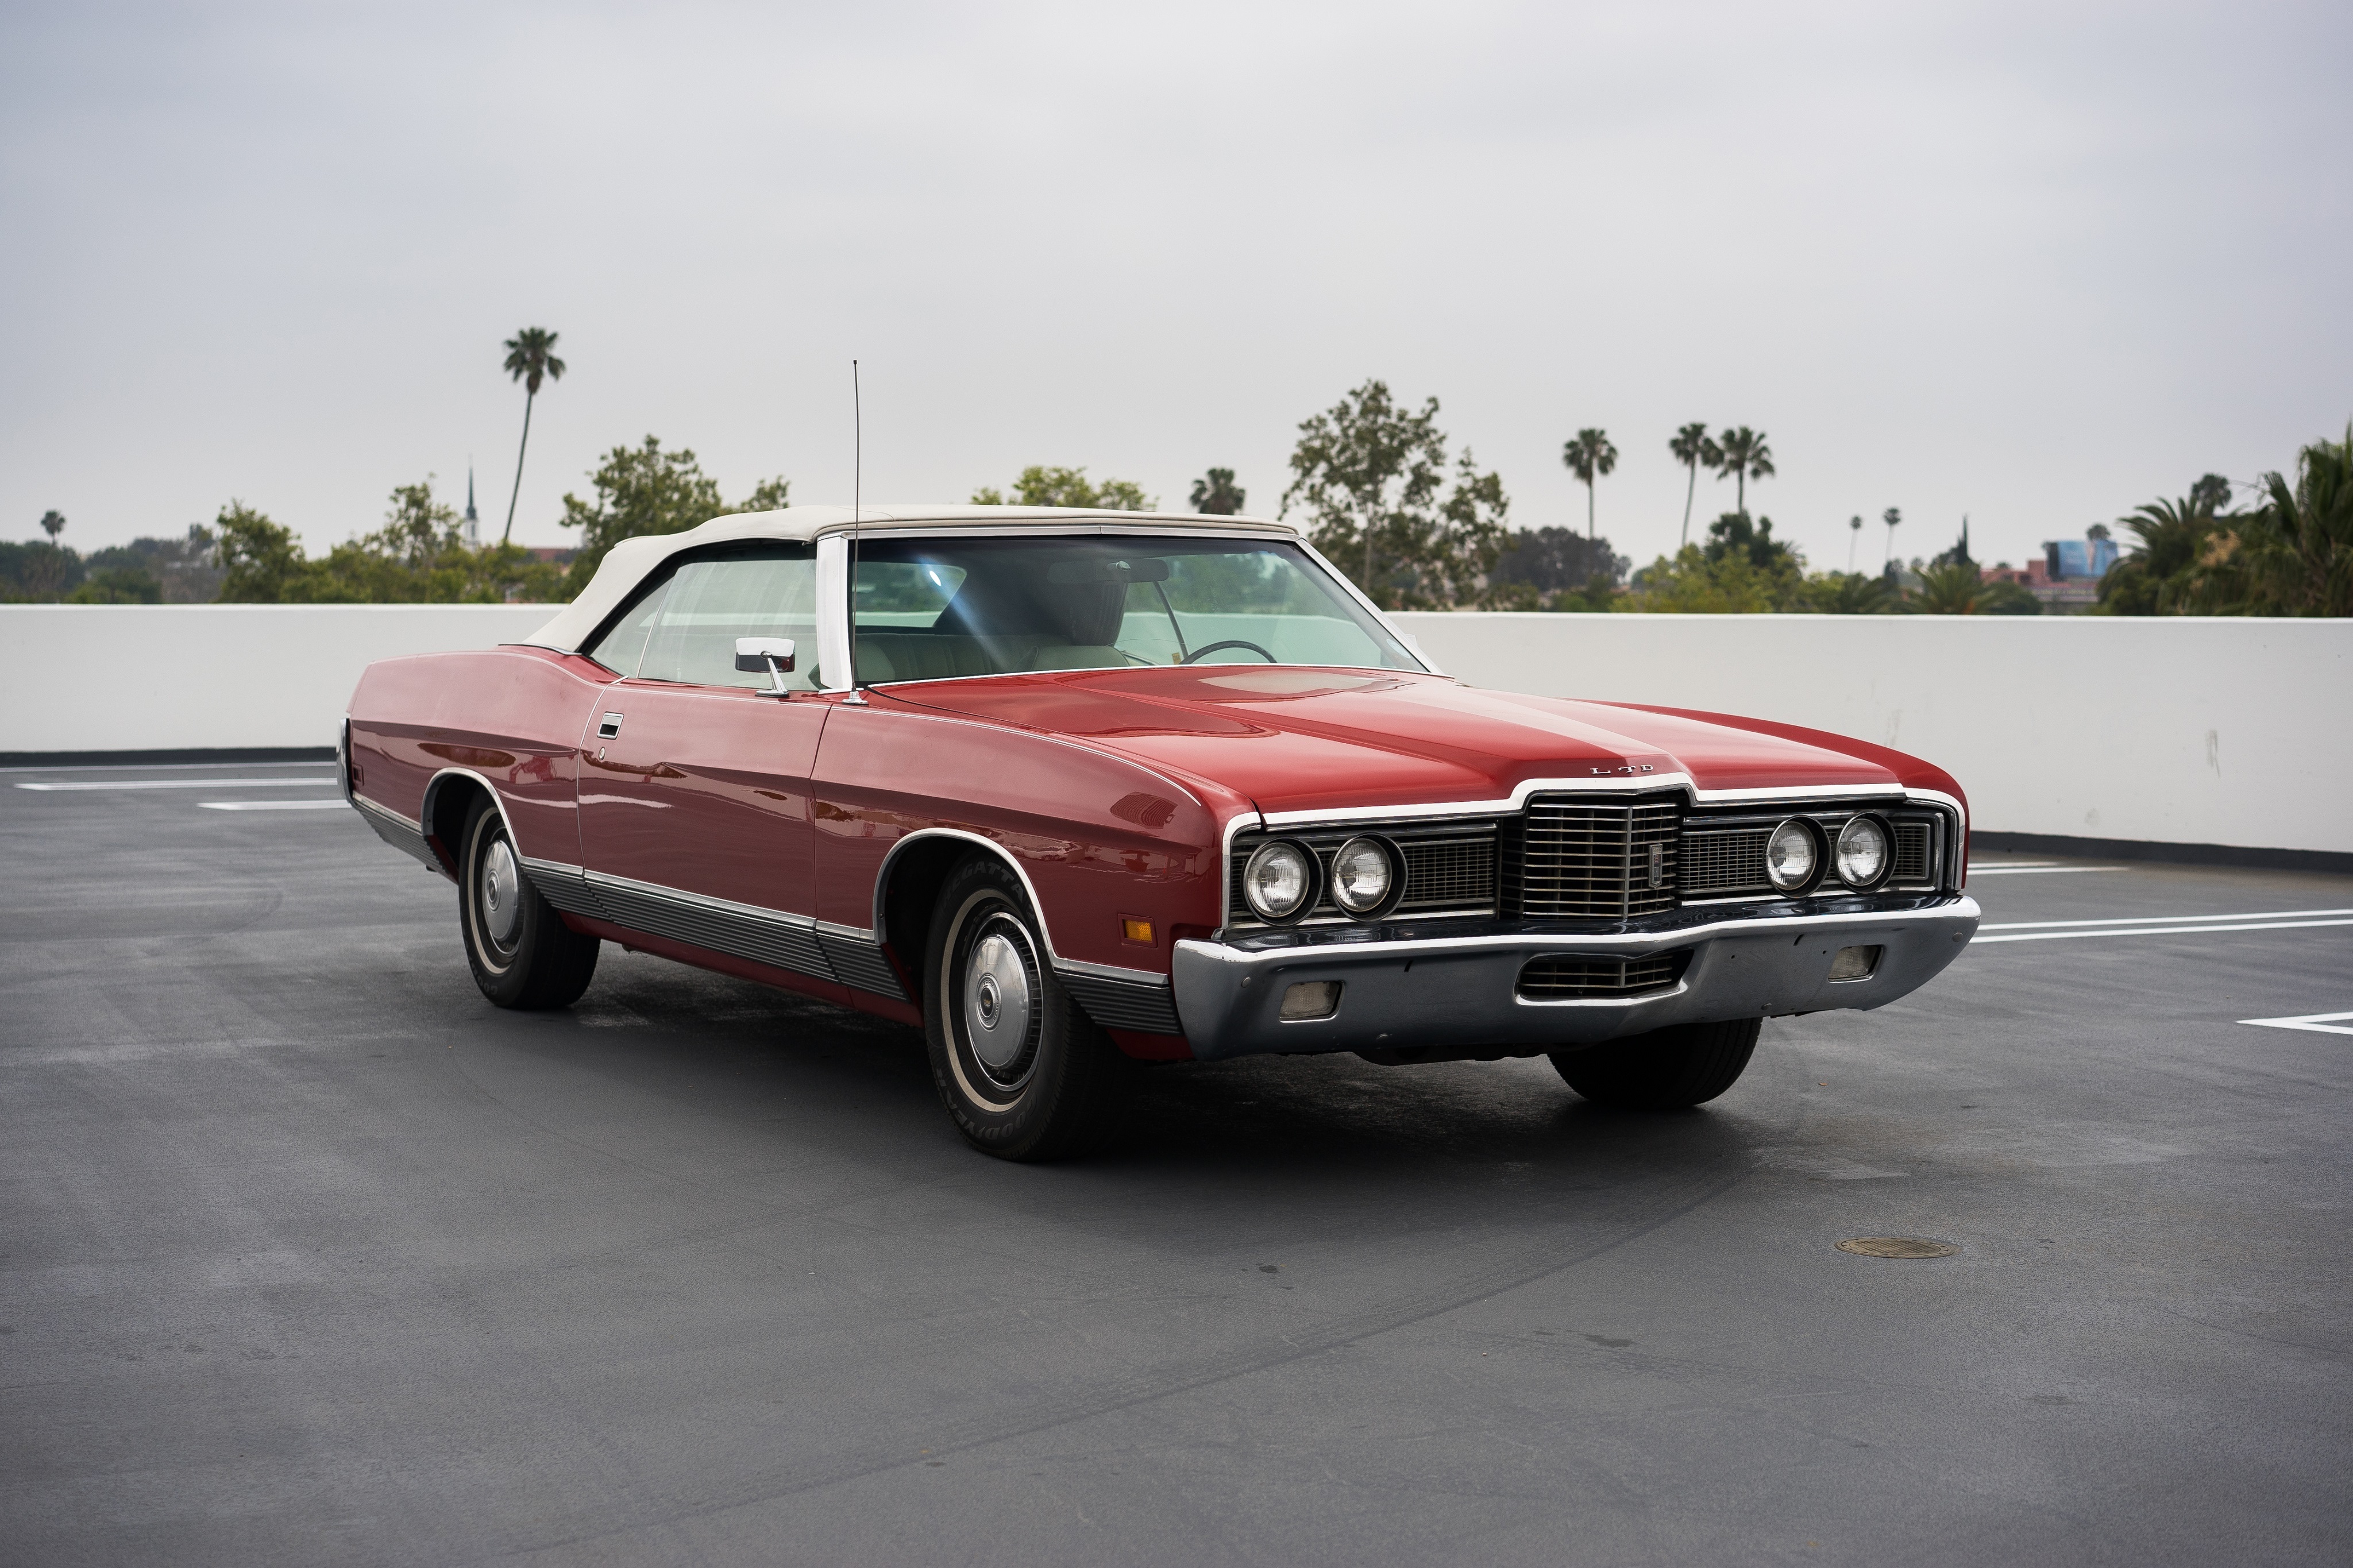 cars, ford, red, side view, convertible, 1972, ltd